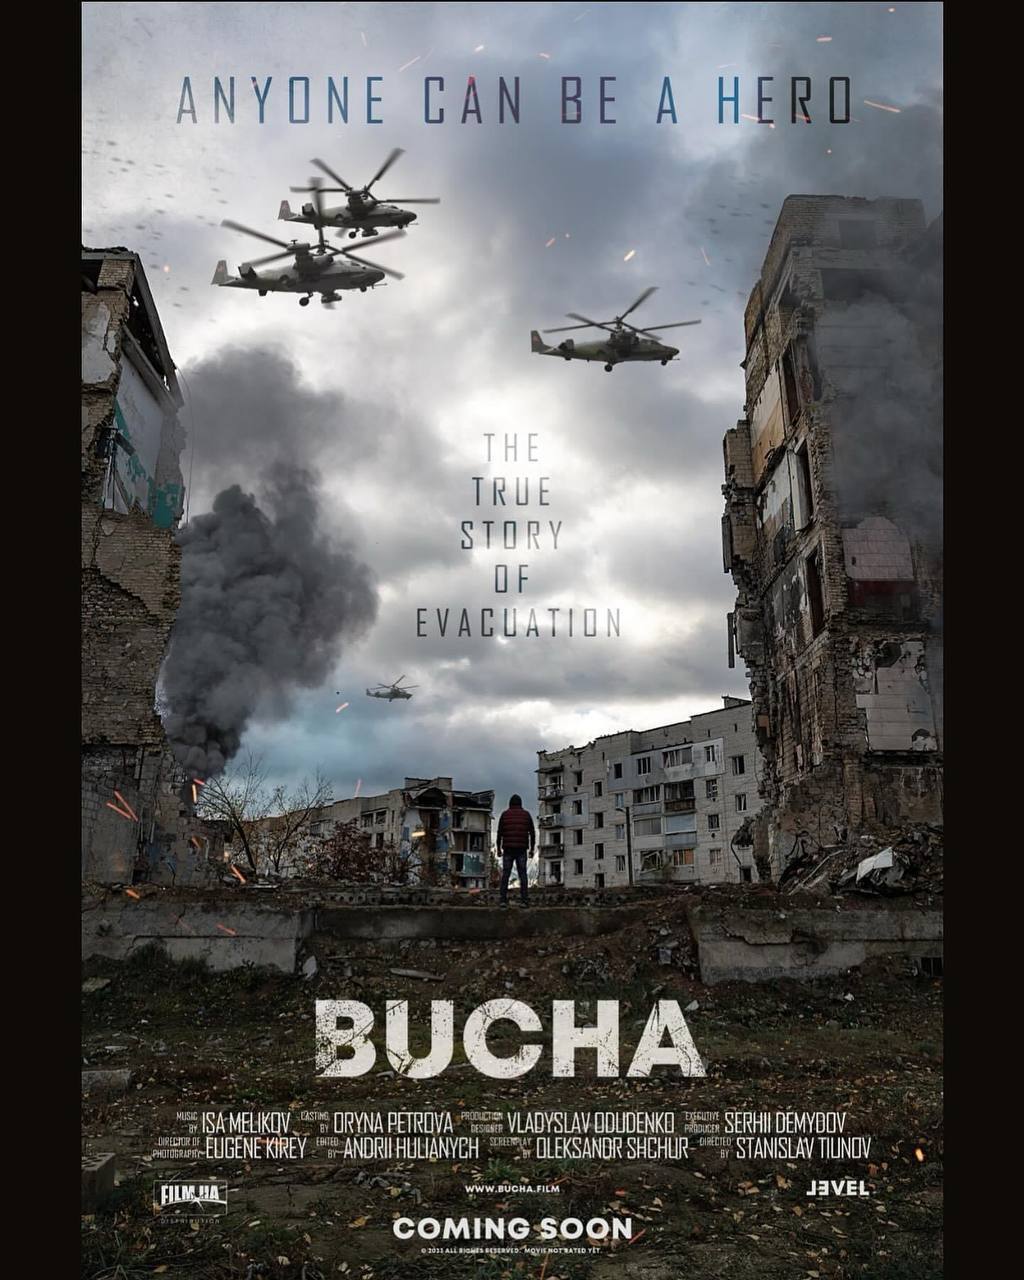 Borodianka on the poster, and the producer made comedies: why the movie ''Bucha'' outraged Ukrainians and what its creators say